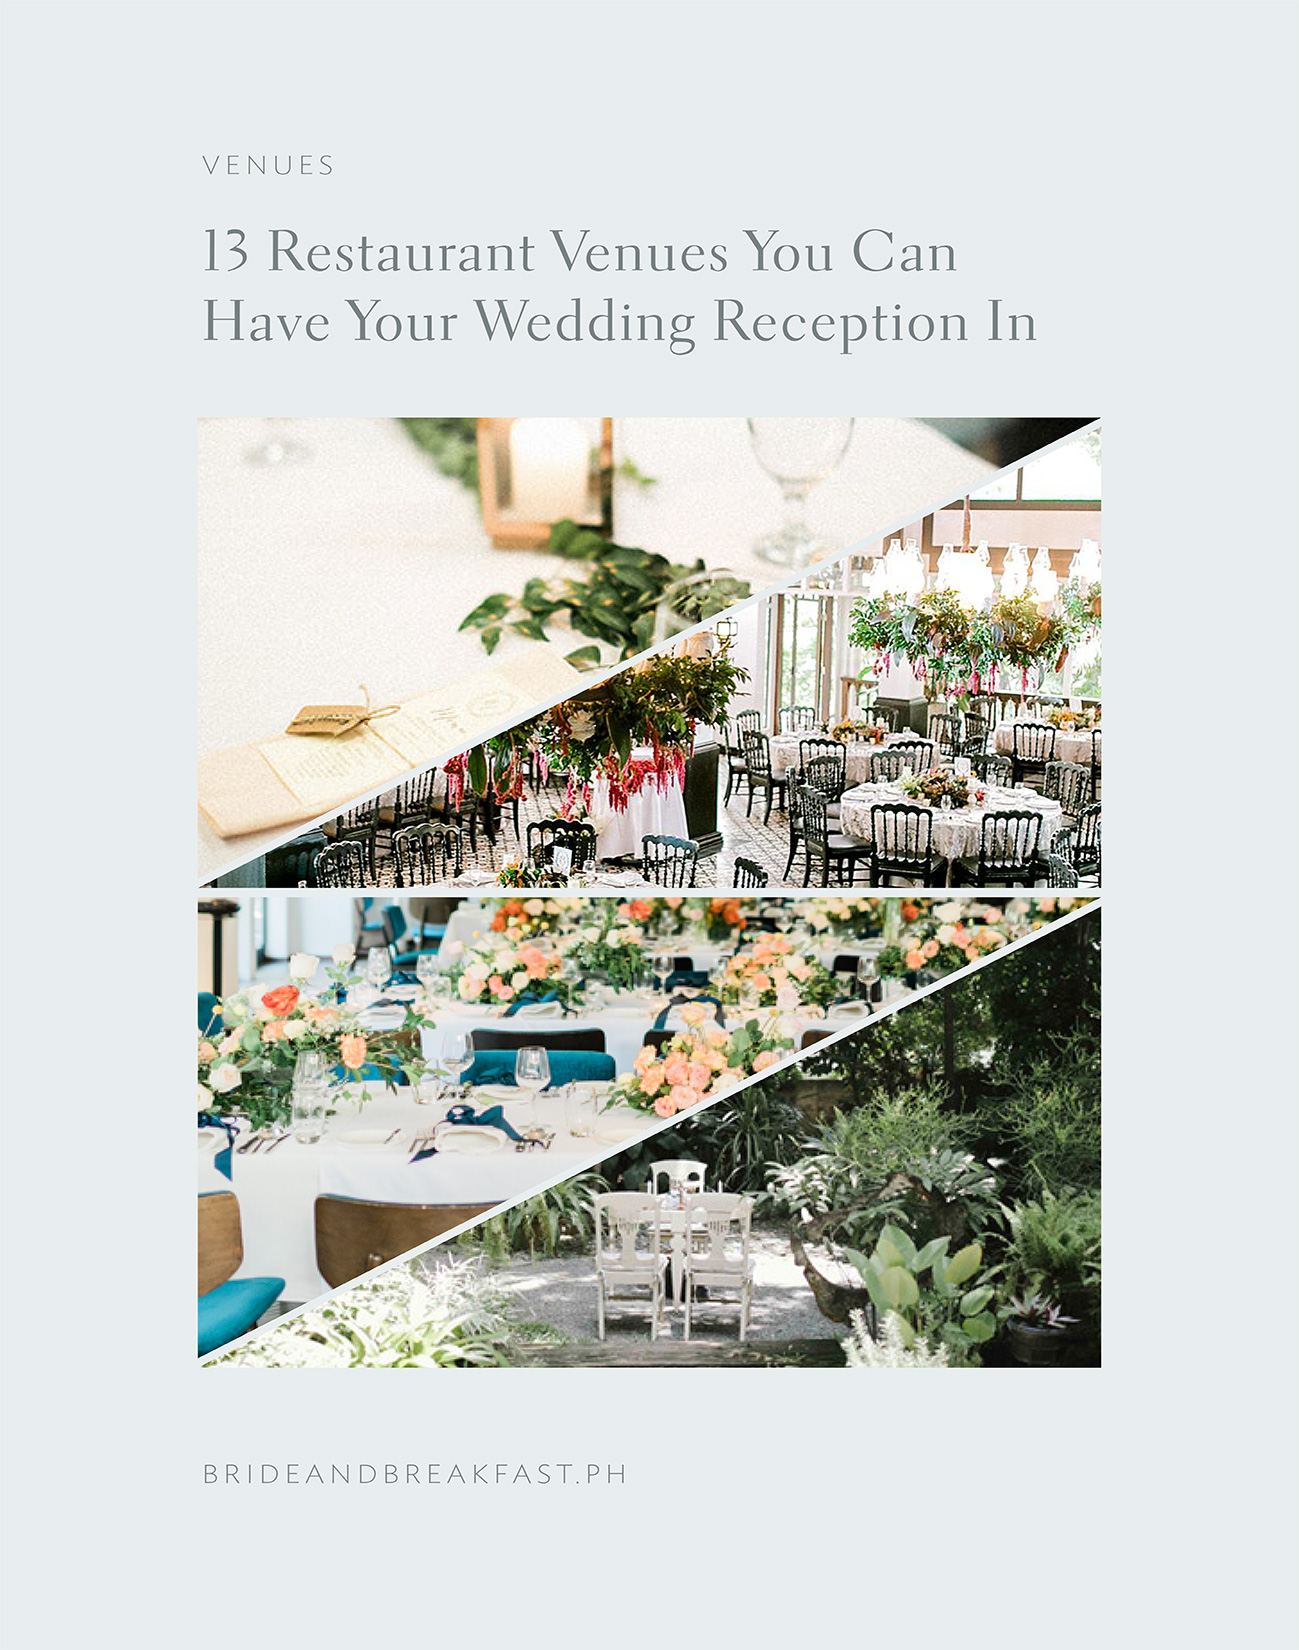 Venues 13 Restaurant Venues You Can Have Your Wedding Reception In